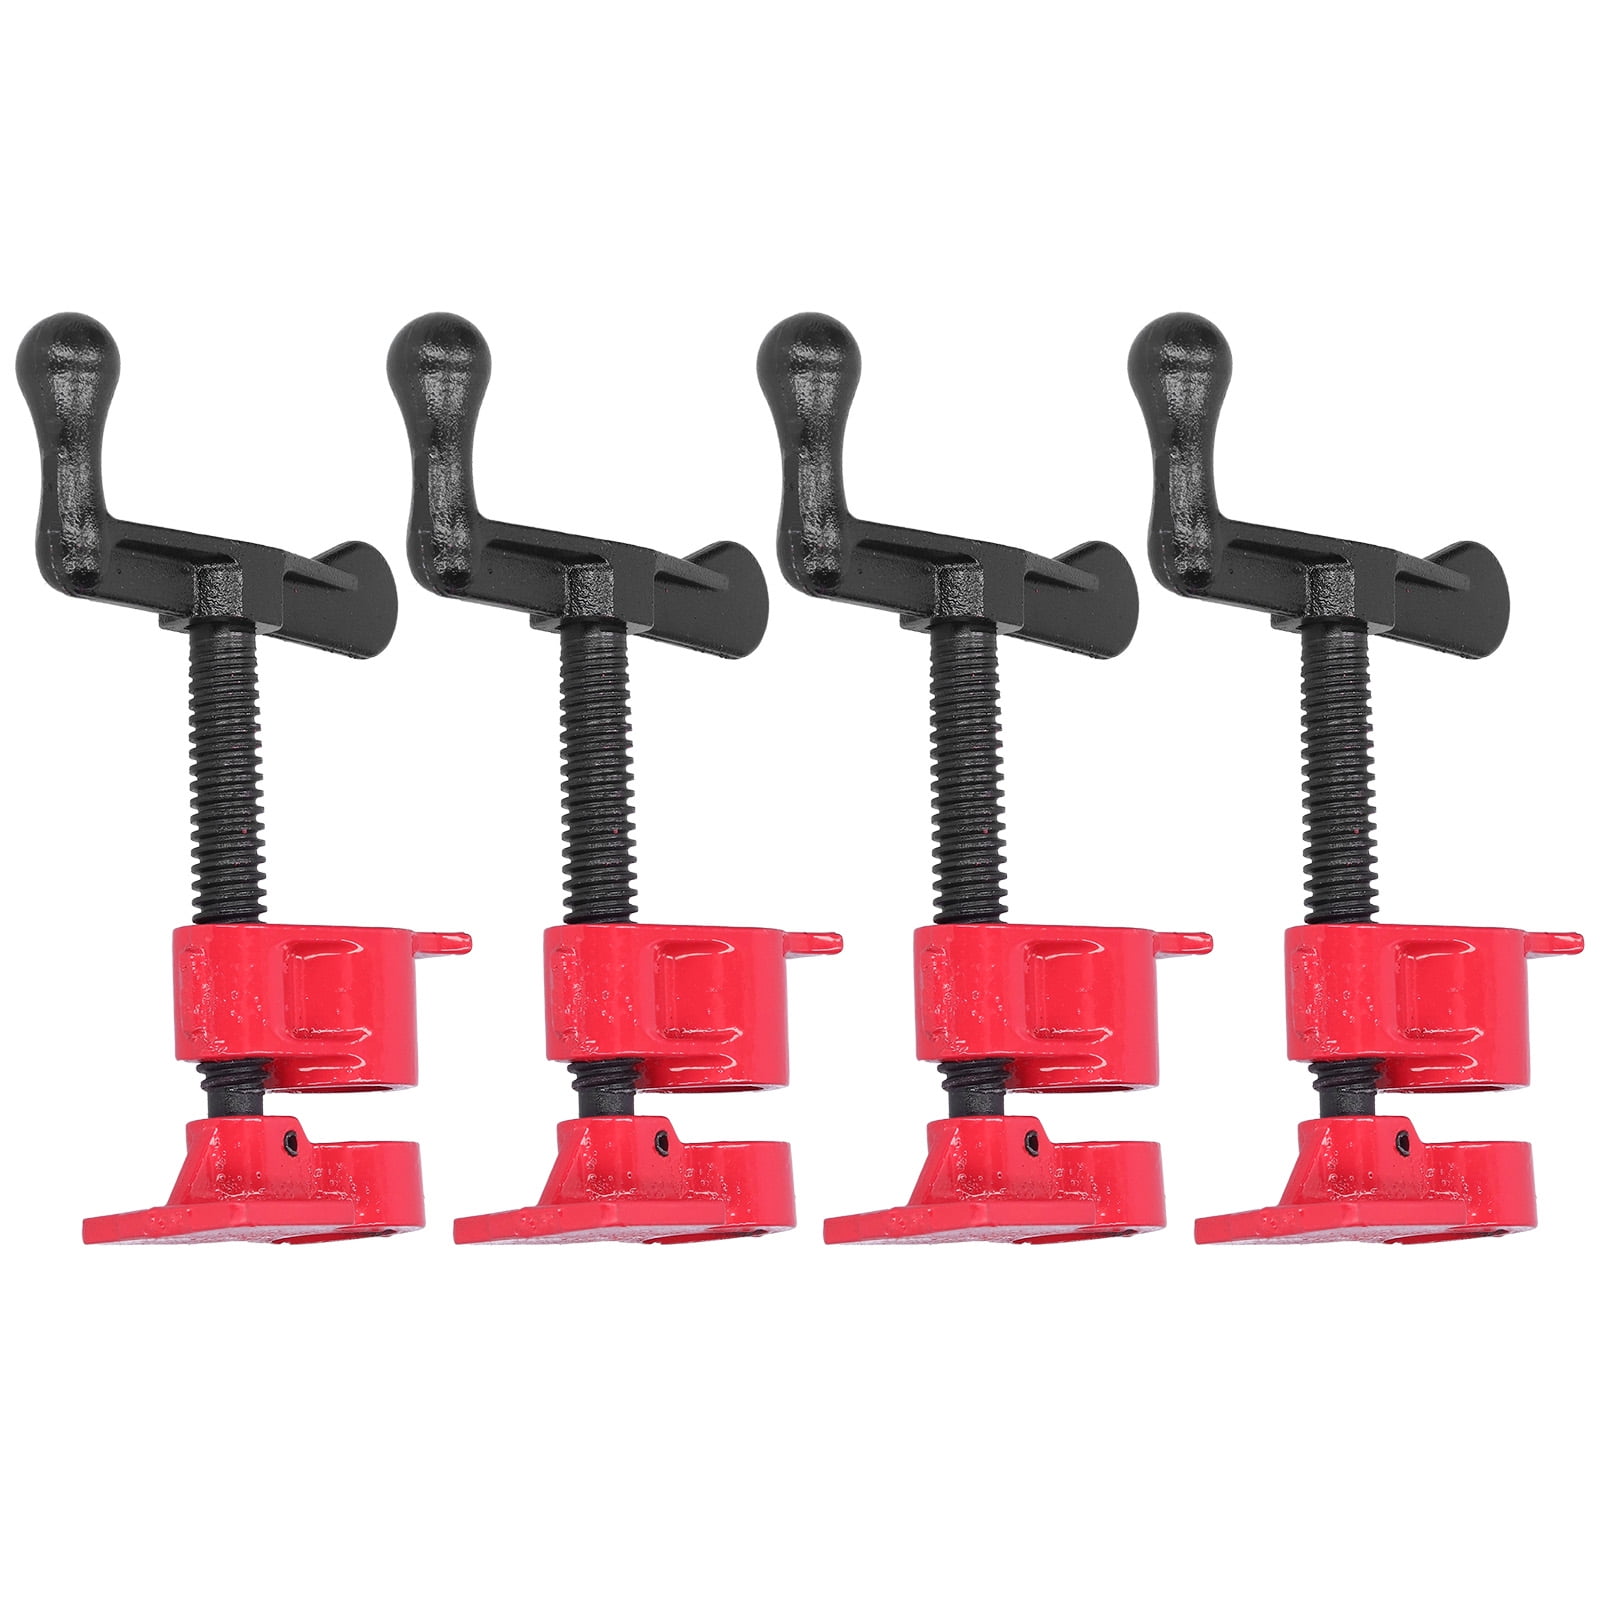 Iron Home Improvement Wood Pipe Clamp Woodworking Tool Assembly Tool Hardware